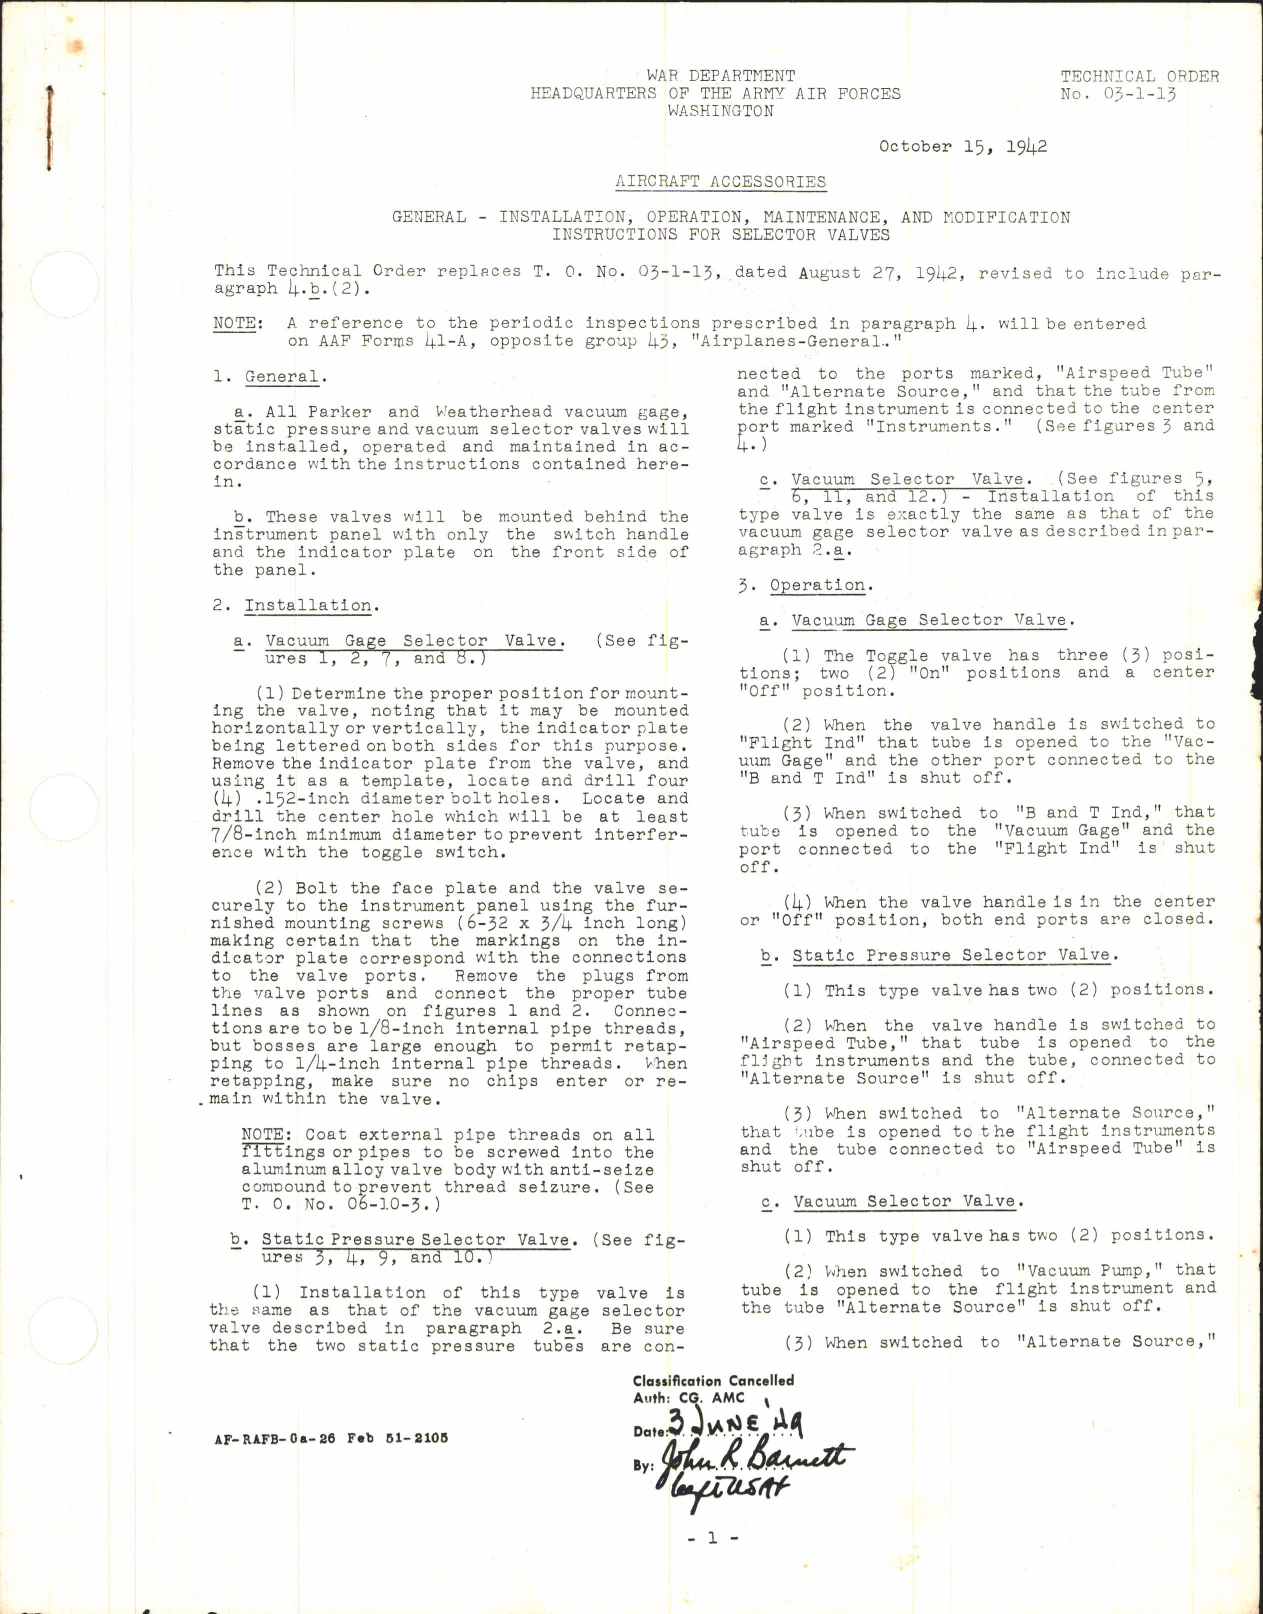 Sample page 1 from AirCorps Library document: General - Installation, Operation, Maintenance, and Modification Instructions for Selector Valves